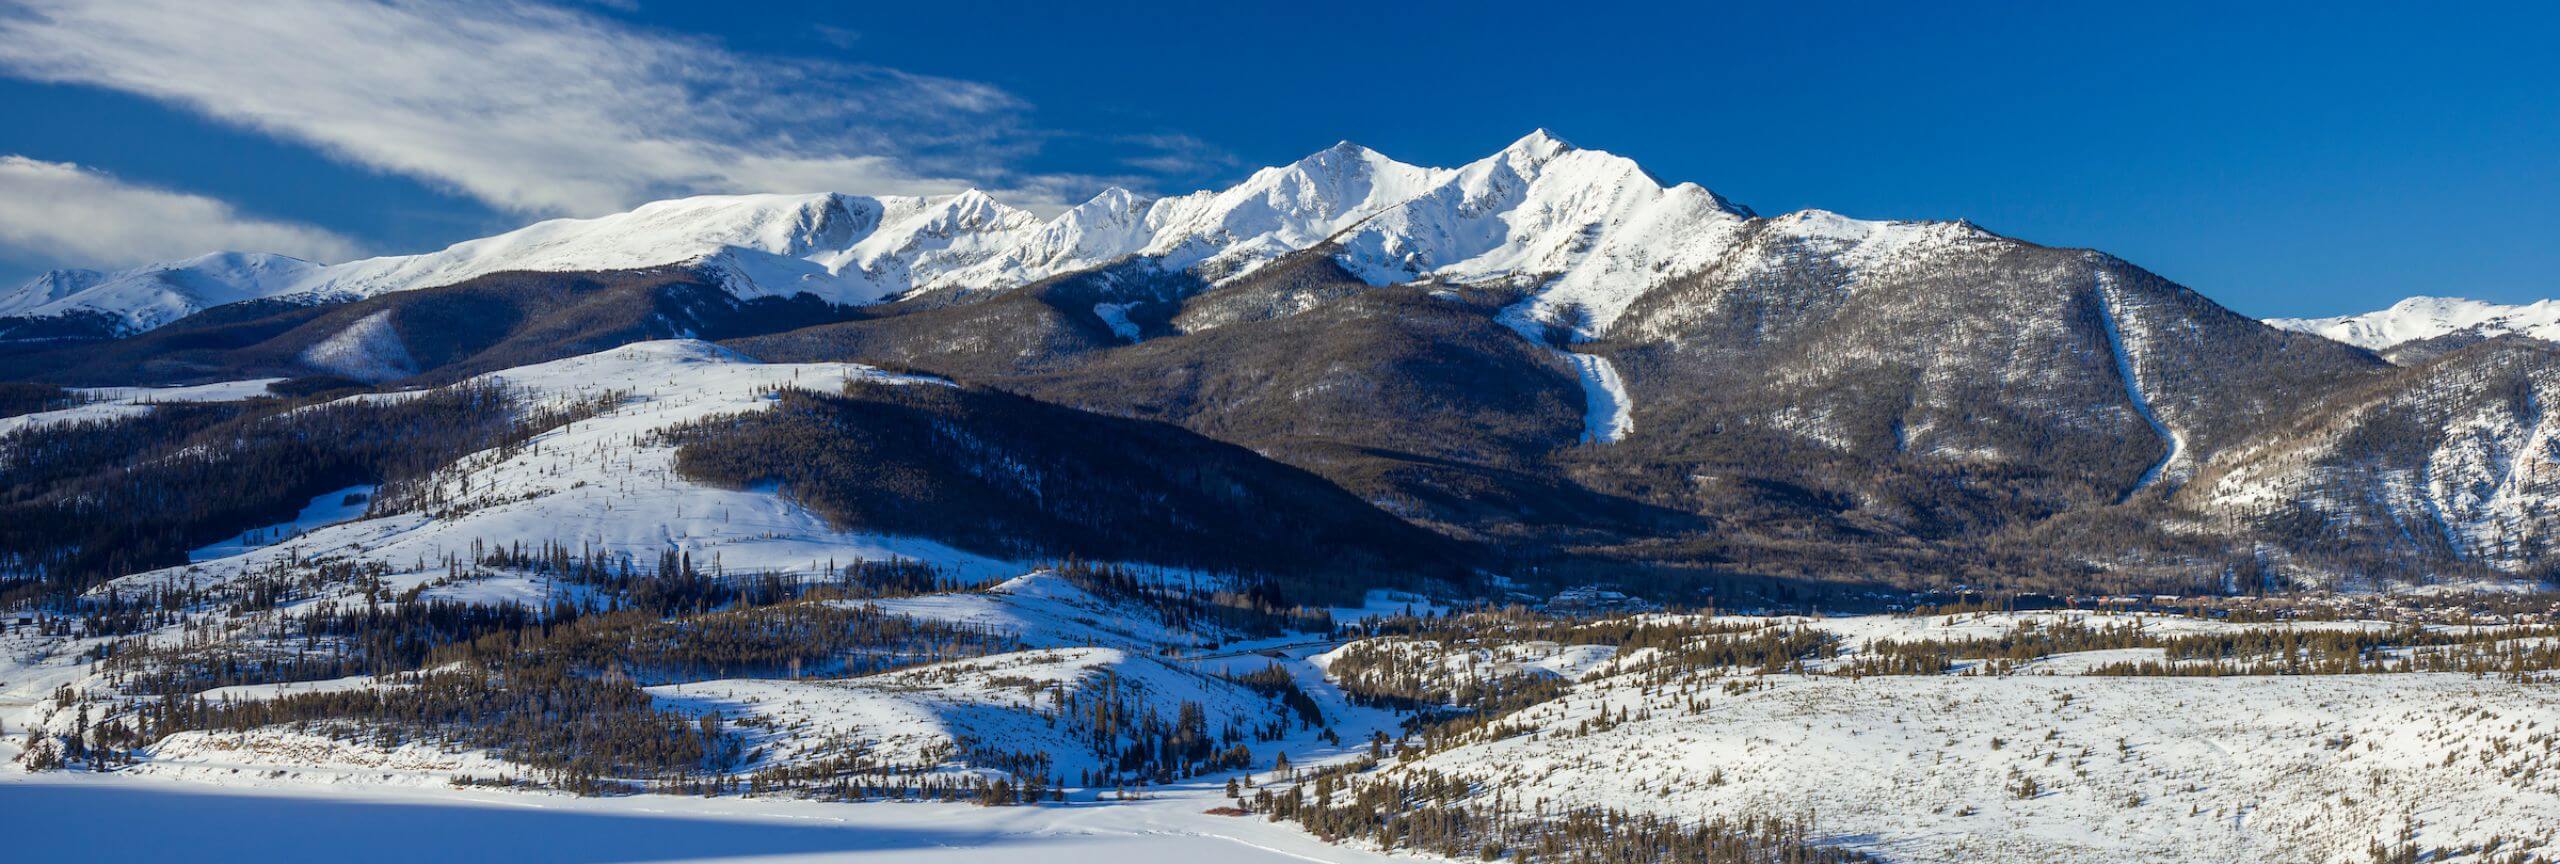 A scenic shot of the Ten Mile Range starting with Mount Royal on the right and ending with Peak two on the left. Peak one sits front and center covered in snow.